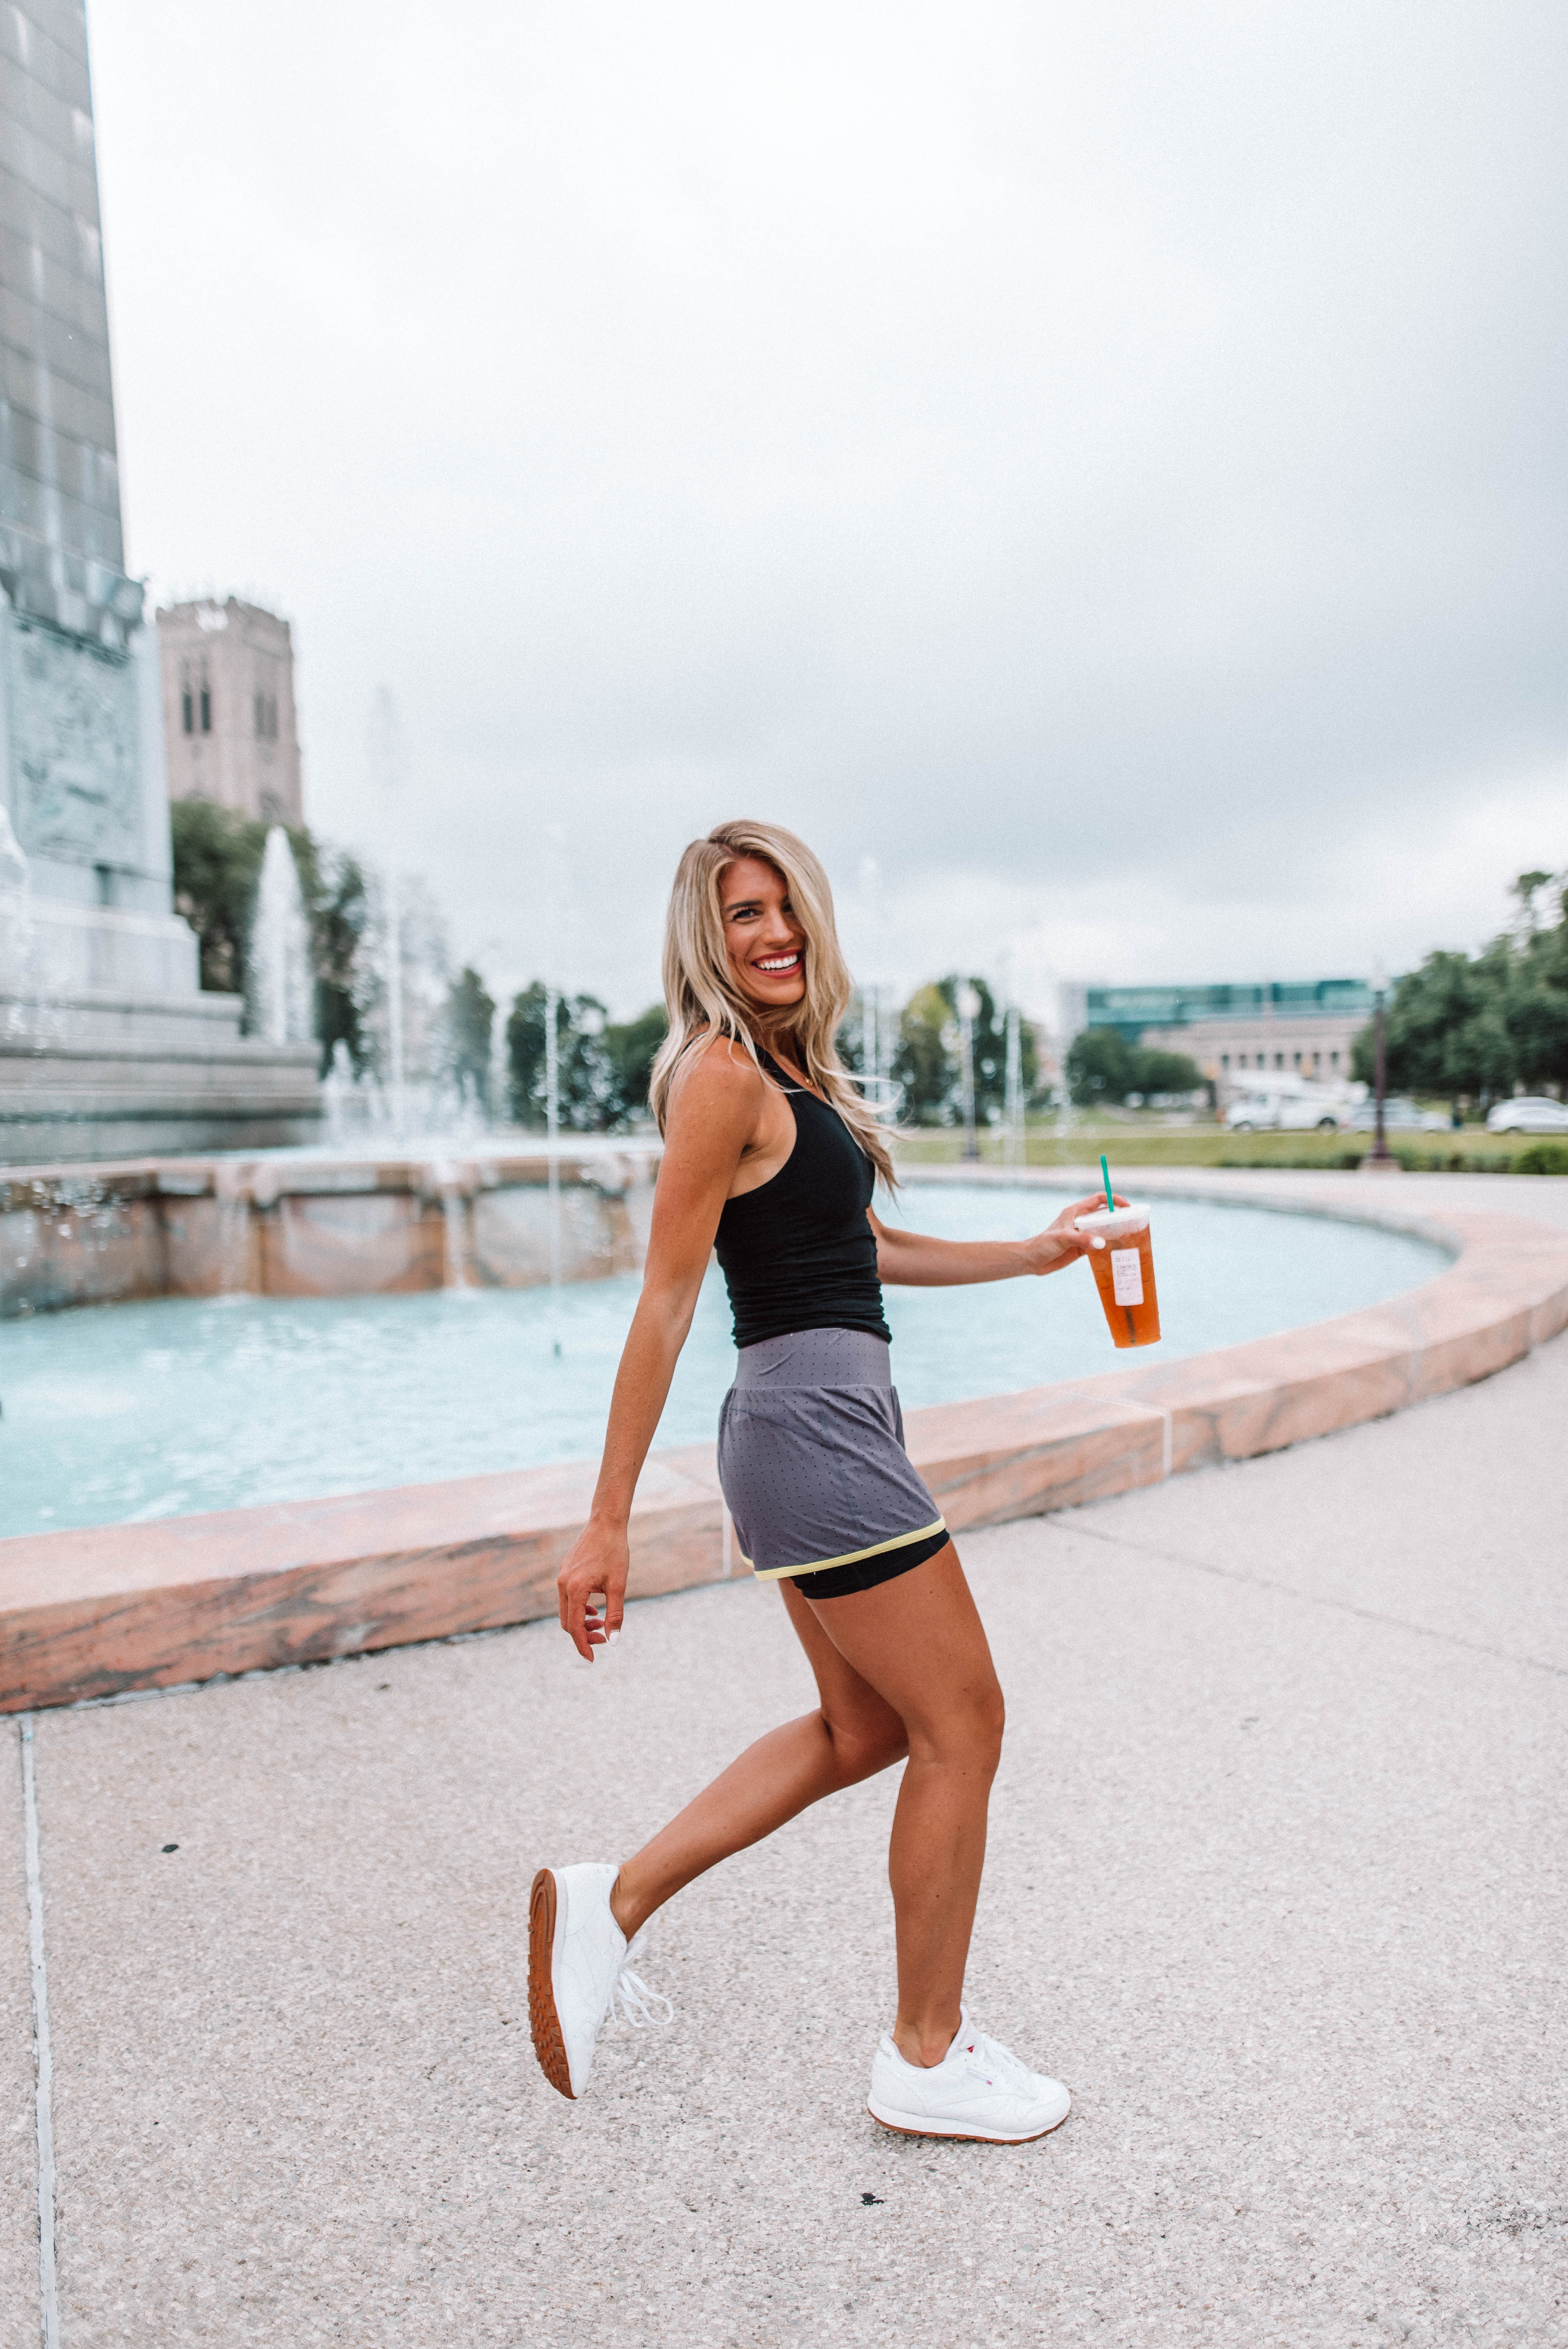 Tall Blonde Bell - Fashion + Lifestyle by My Health Tips - Ashley Bell @tallblondebell.com